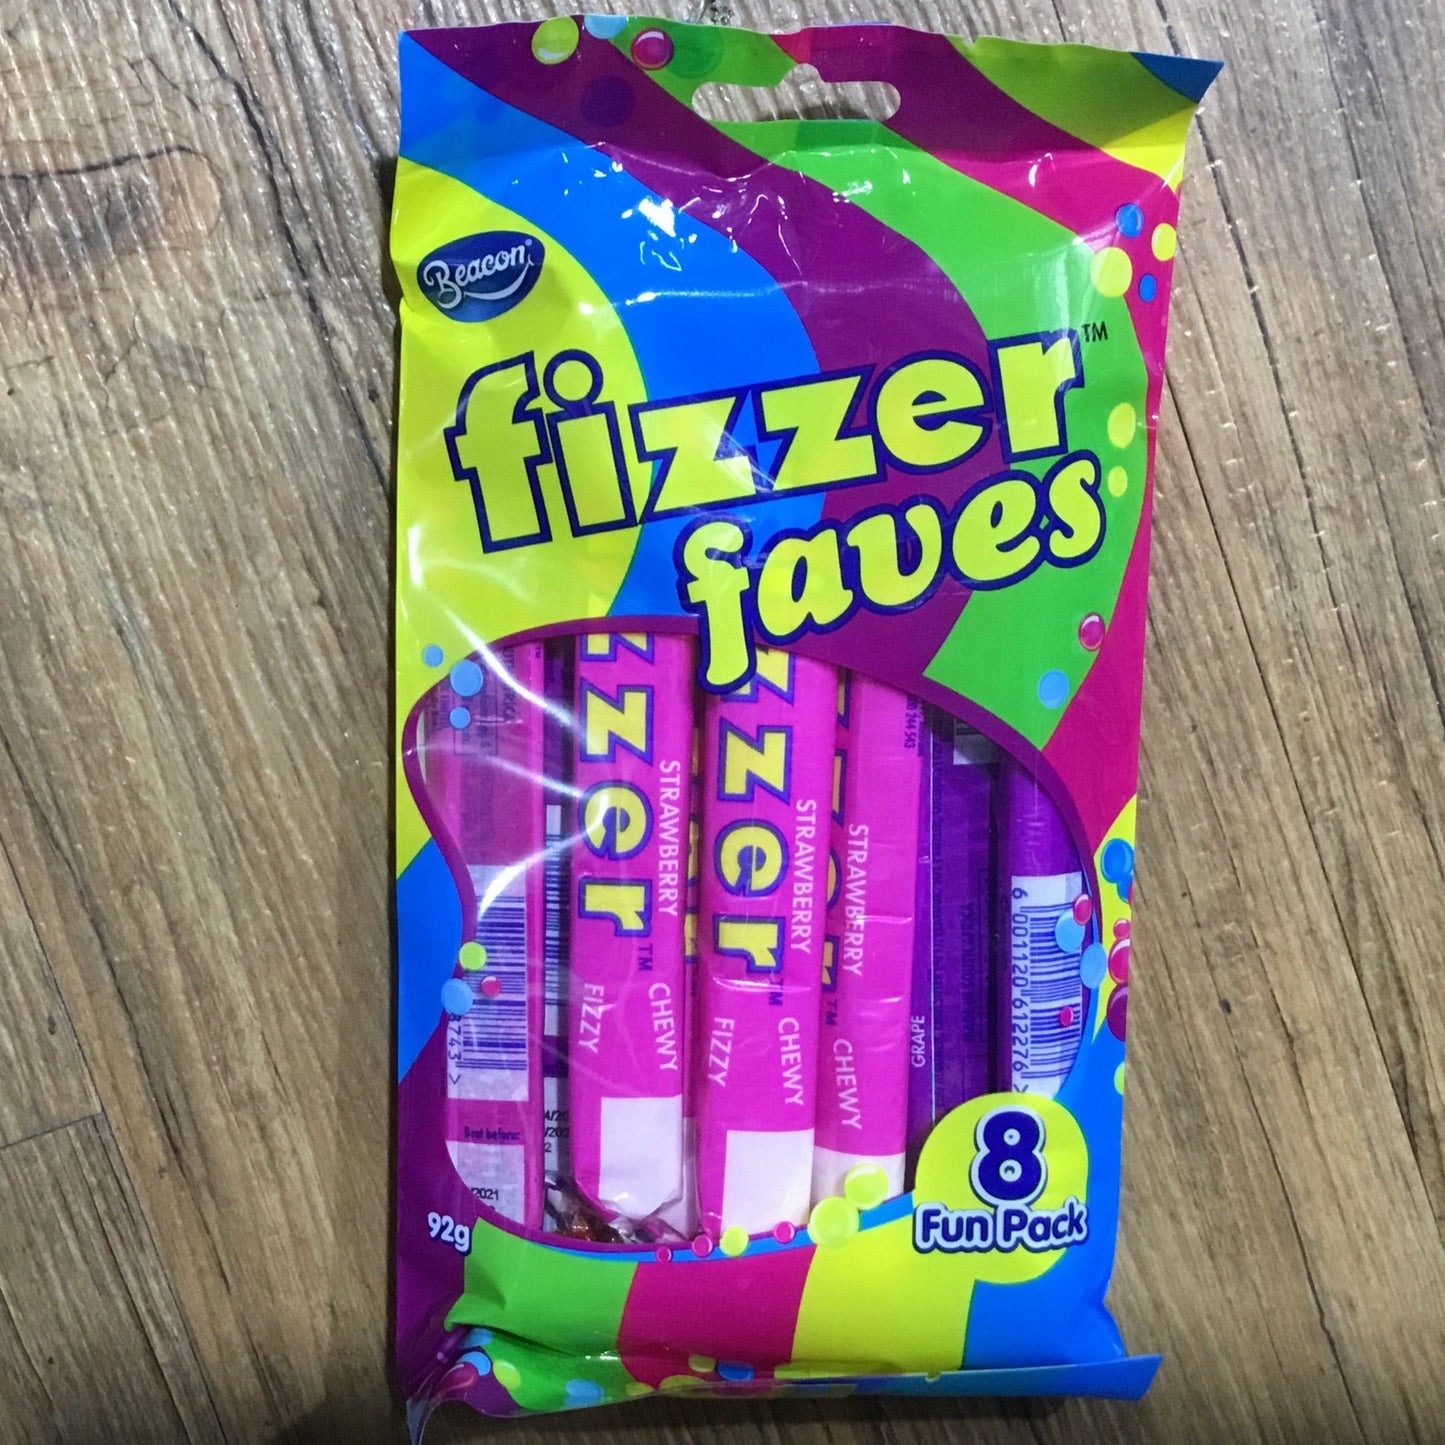 Beacon Fizzer Faves 10 Pack